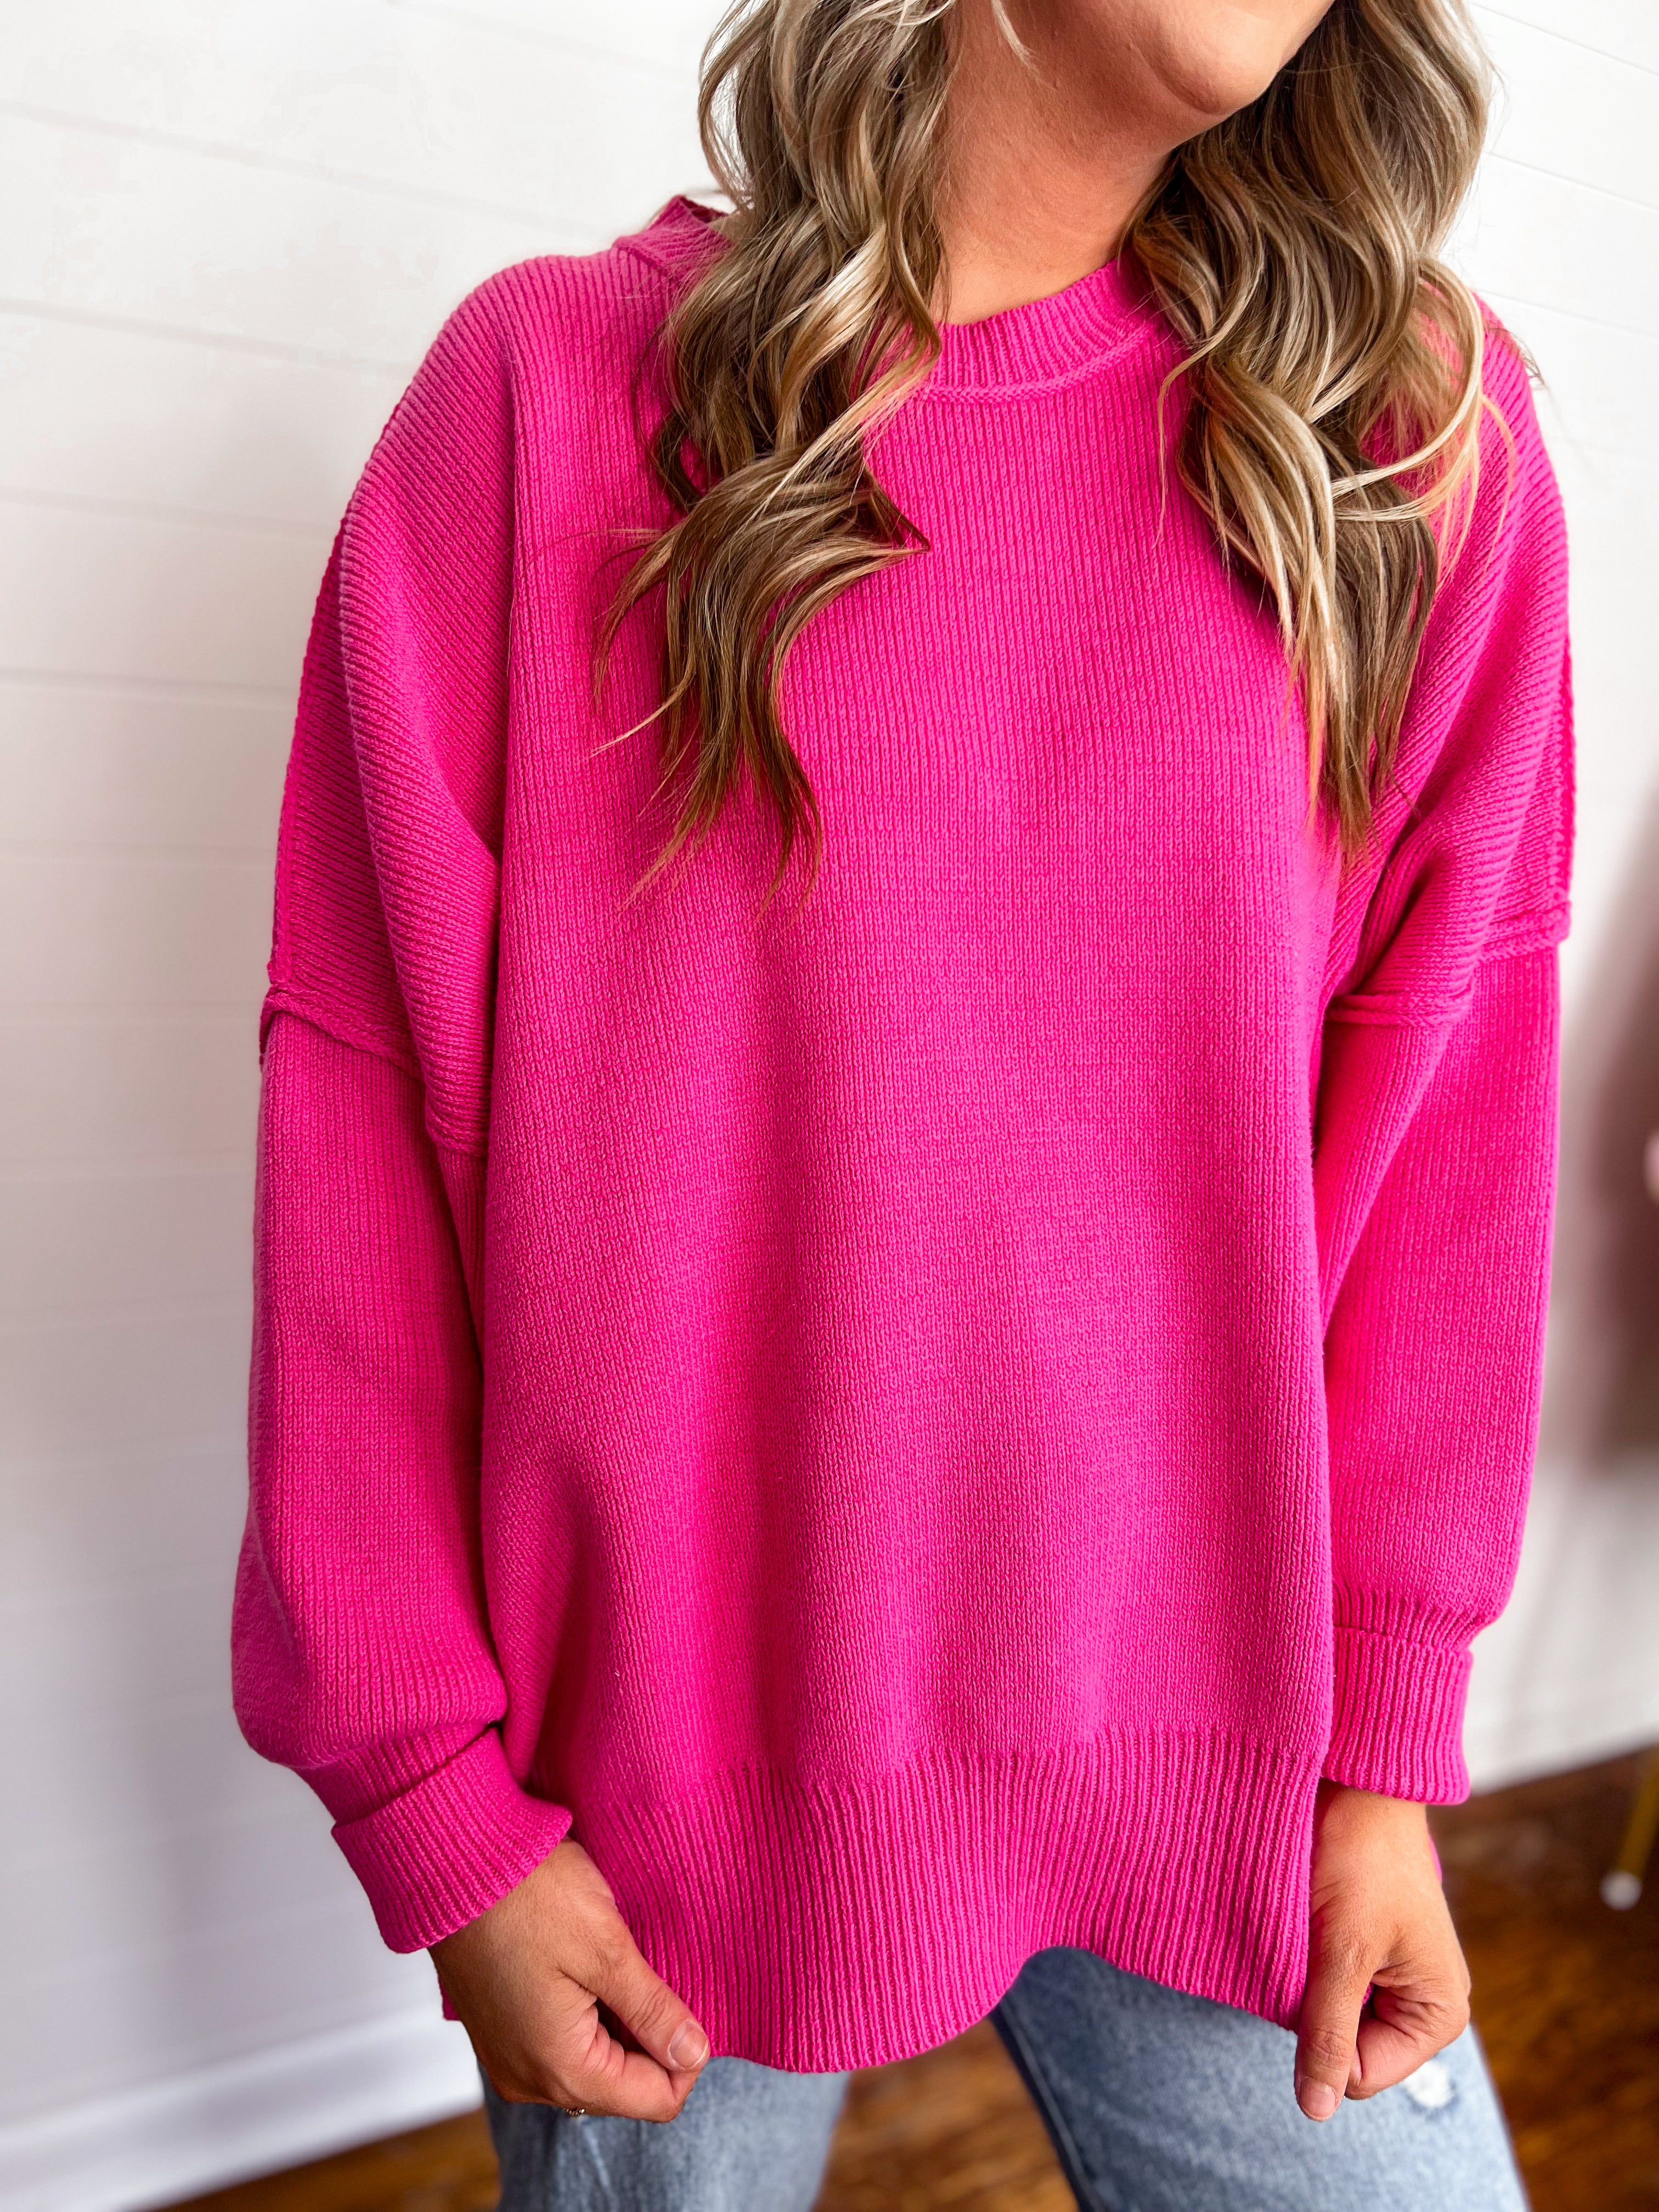 Cotton Candy Oversized Sweater